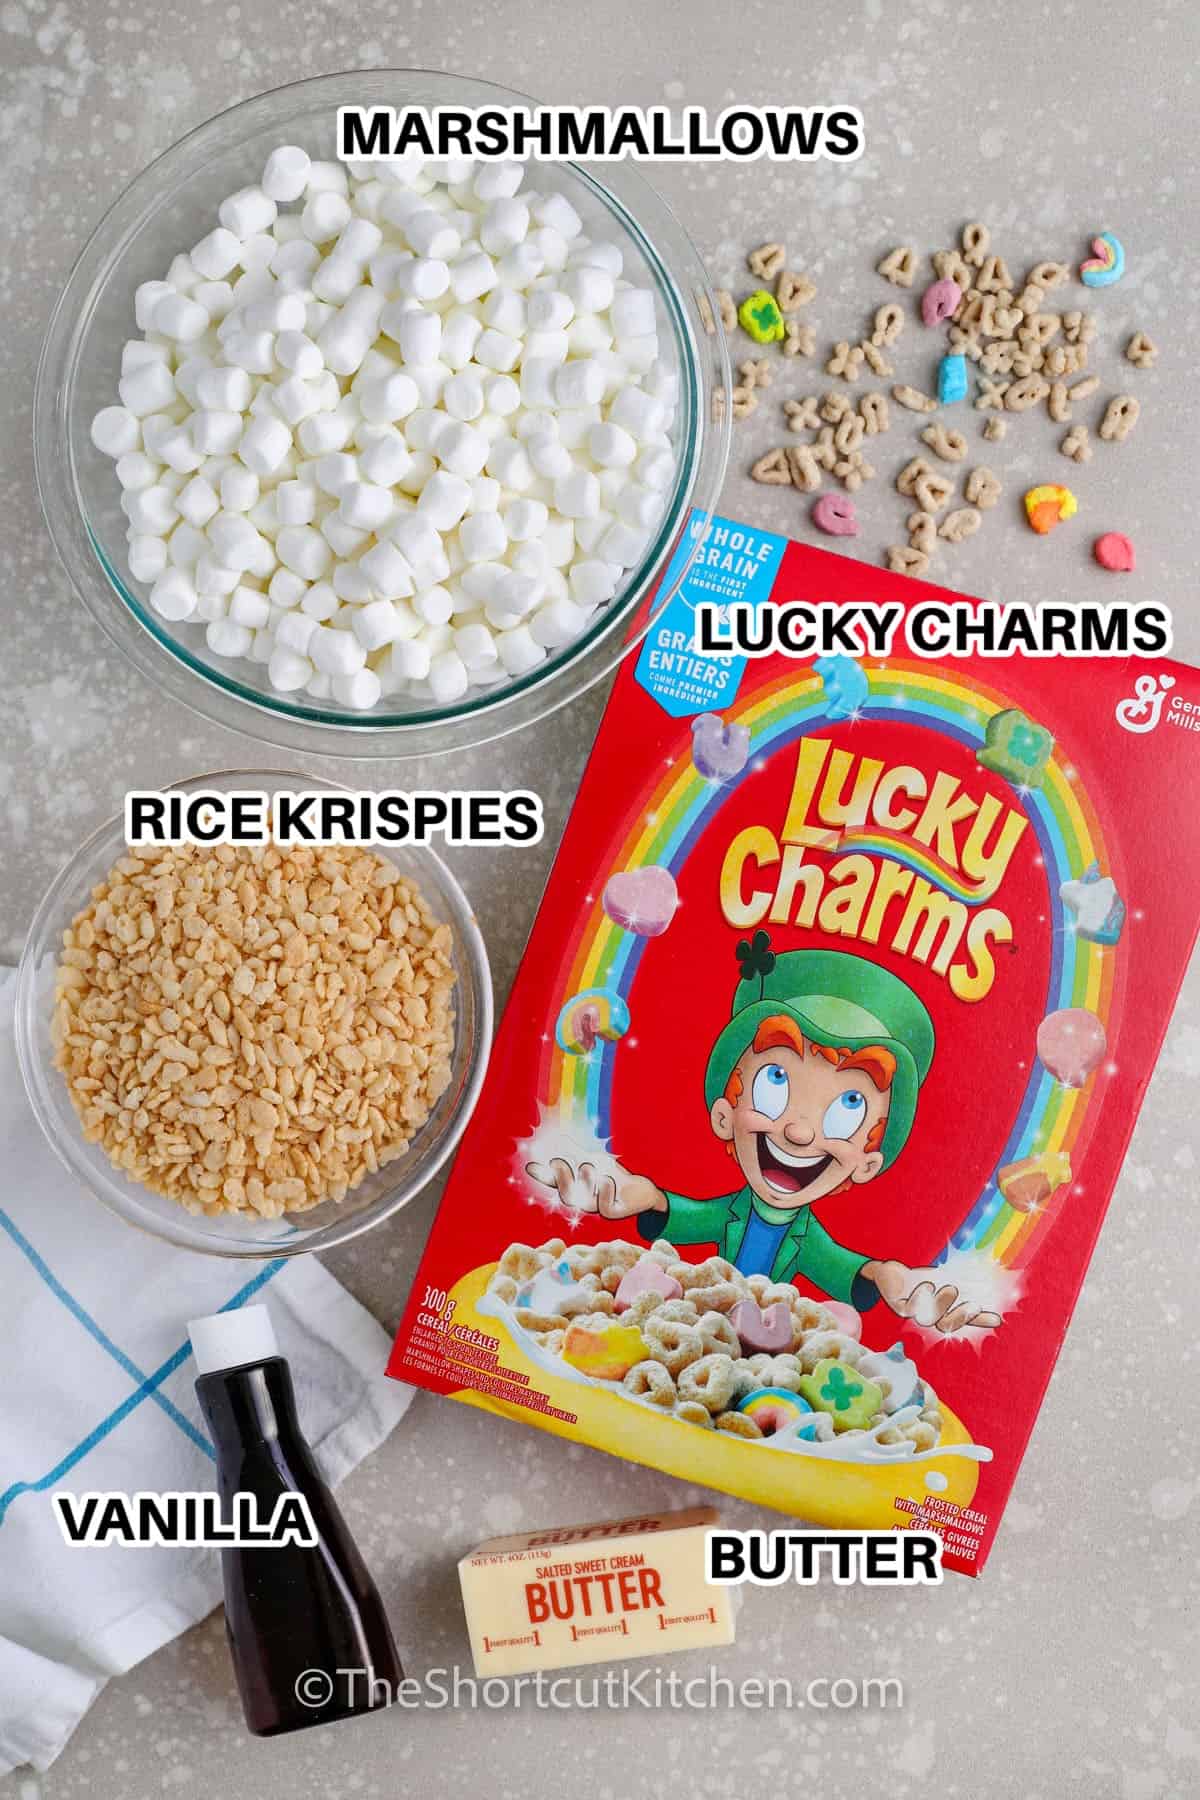 Ingredients to make Lucky Charms Rice Krispie Treats labeled: Marshmallows, lucky charms, rice krispies, vanilla, and butter